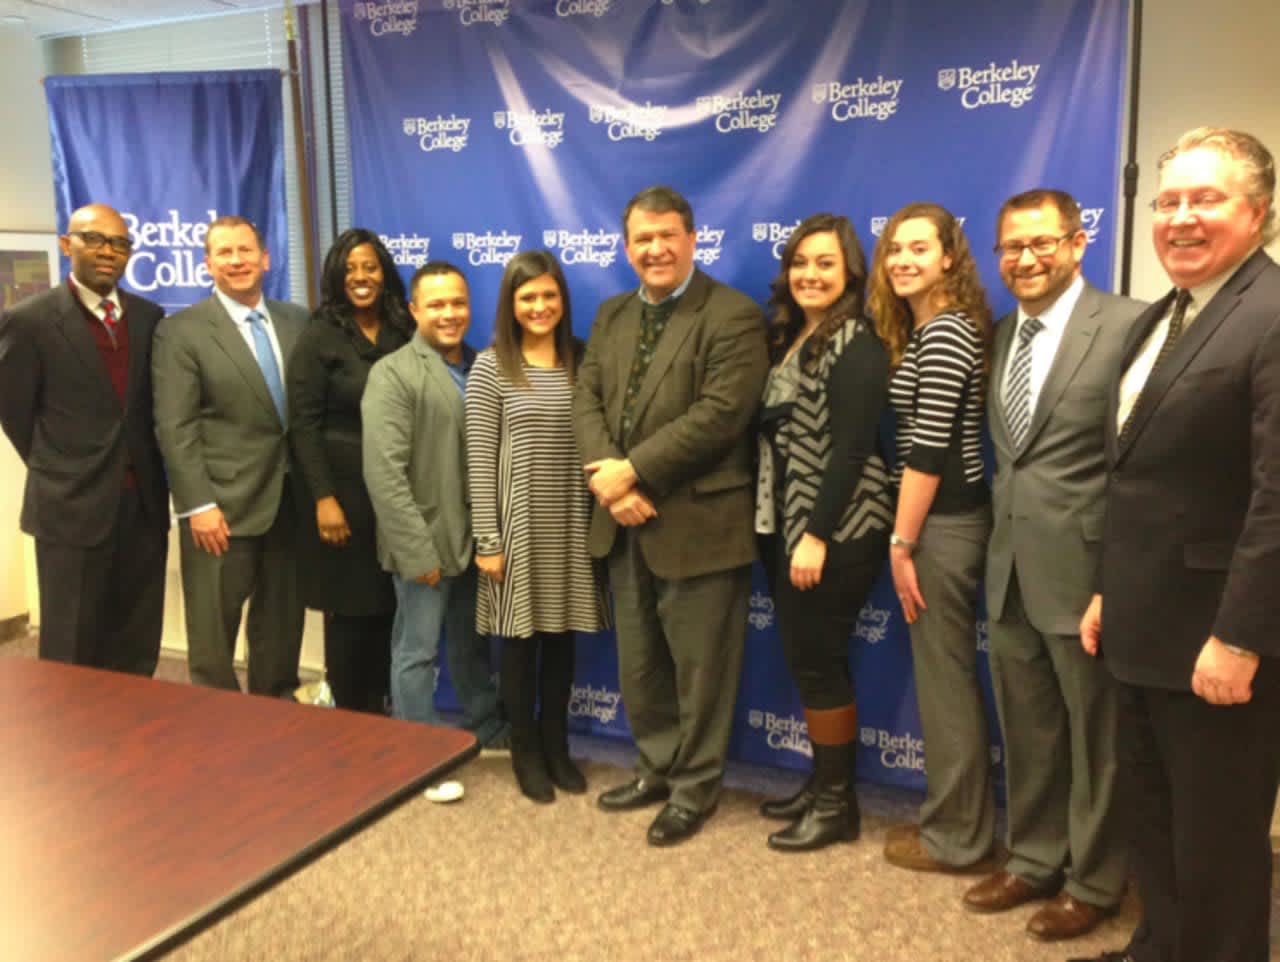 State Senator George Latimer visited Berkeley College in White Plains on Tuesday, January 5, 2016.